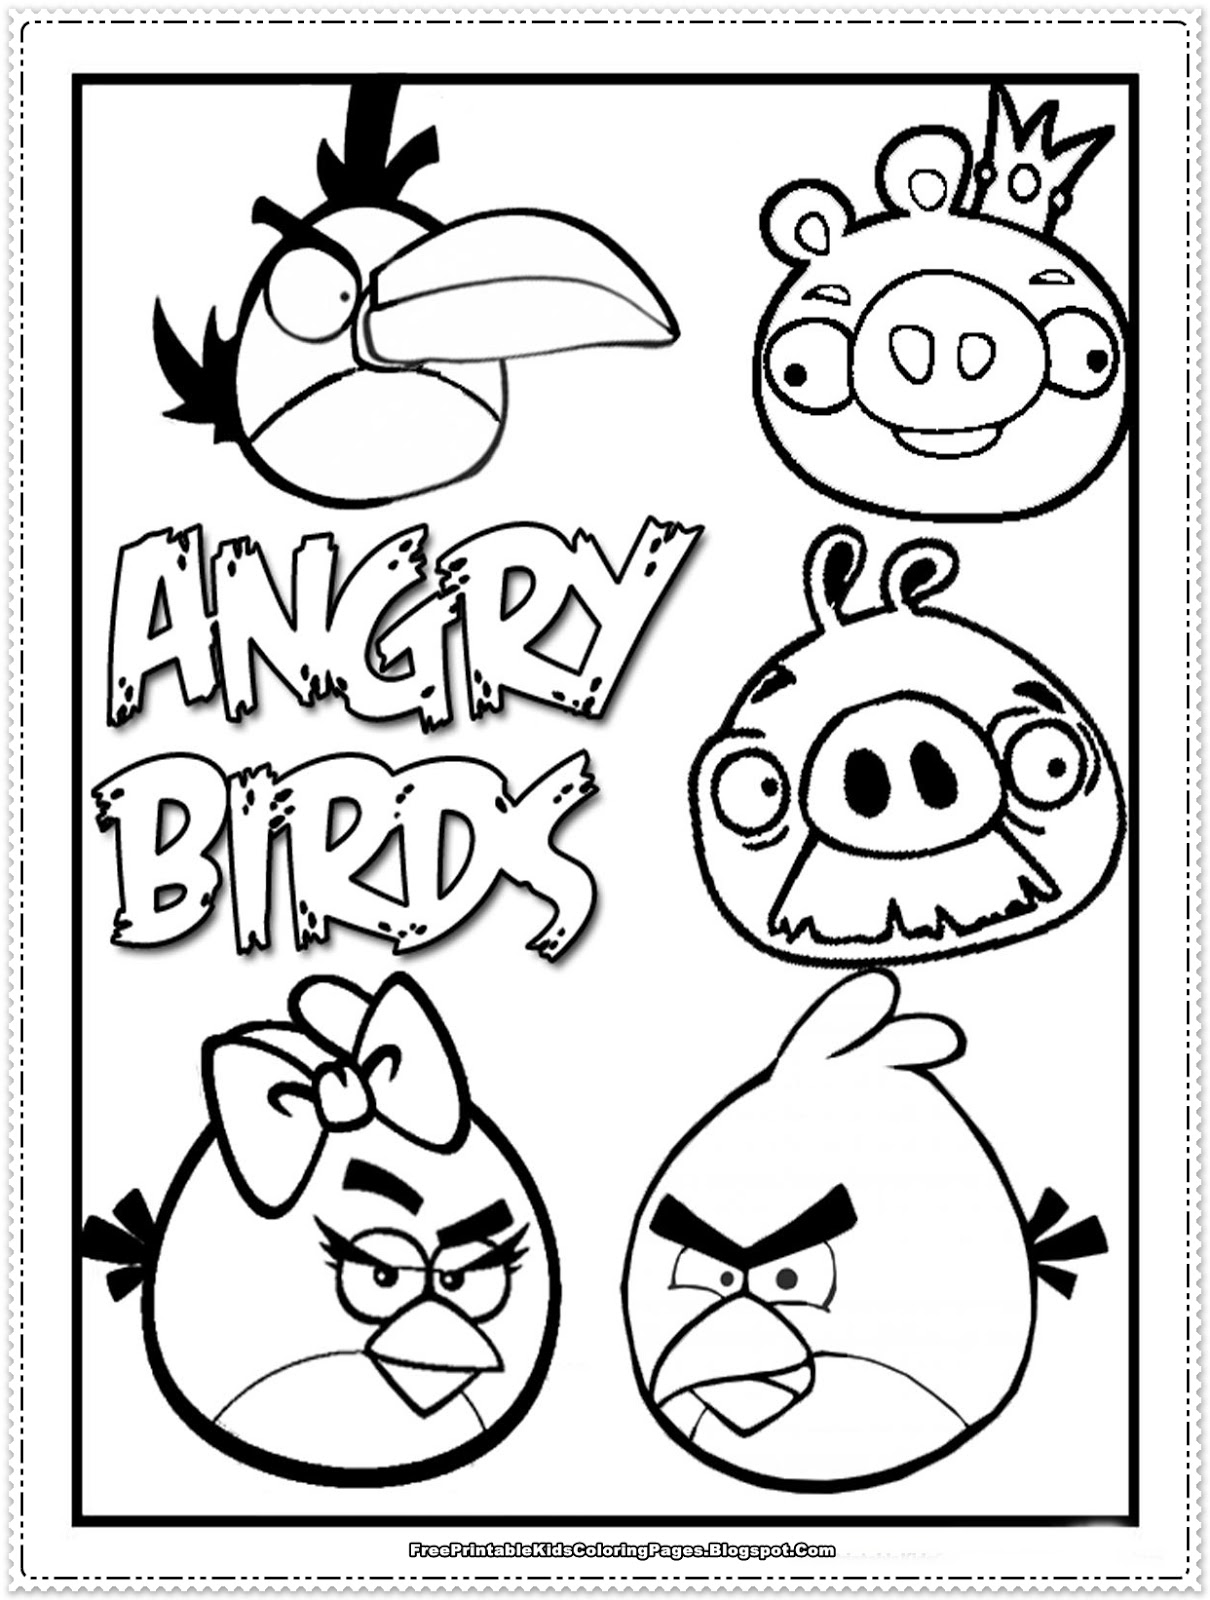 Download Angry Birds kids Coloring Pages - Free Printable Kids ...